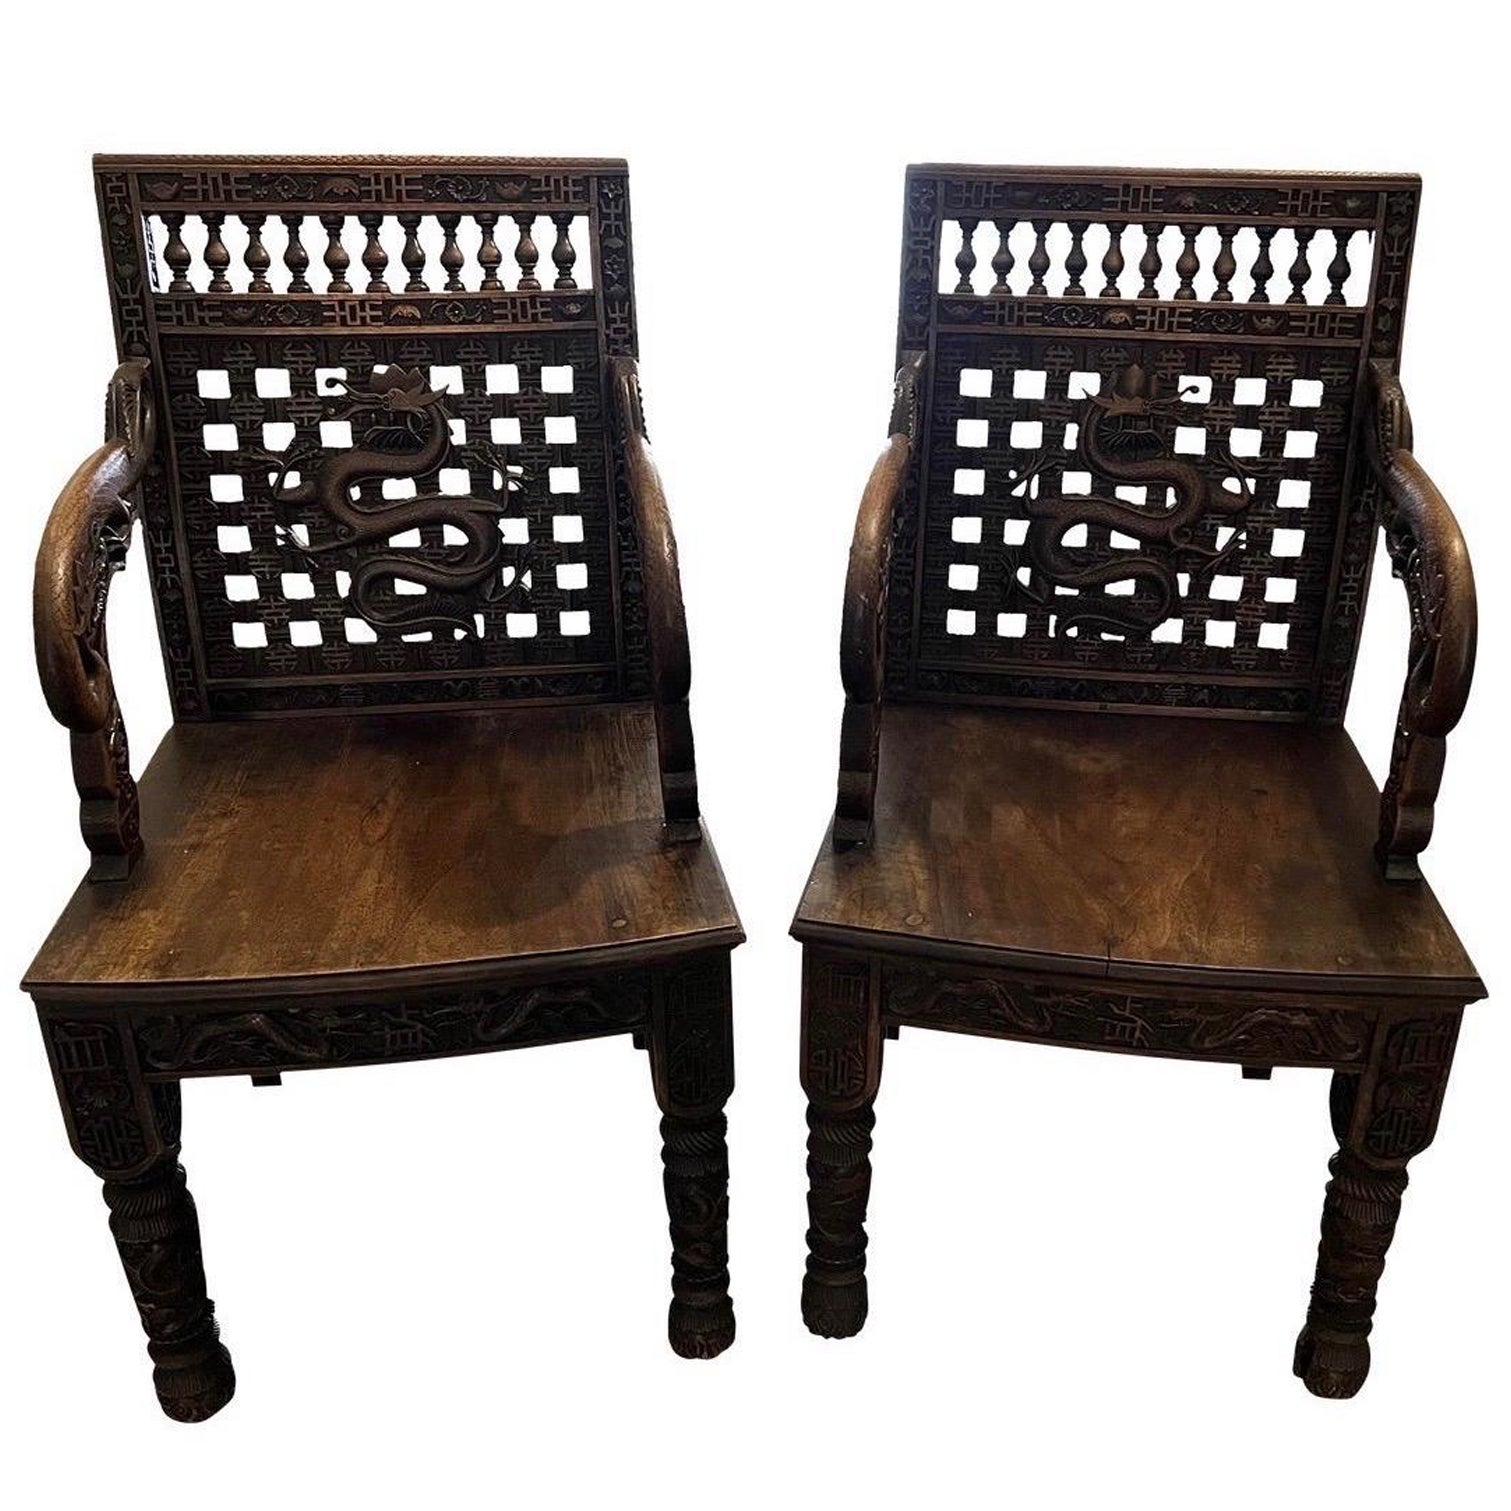 19th Century, Antique Carved Chinese Dragon and Symbolic Armchairs, Pair